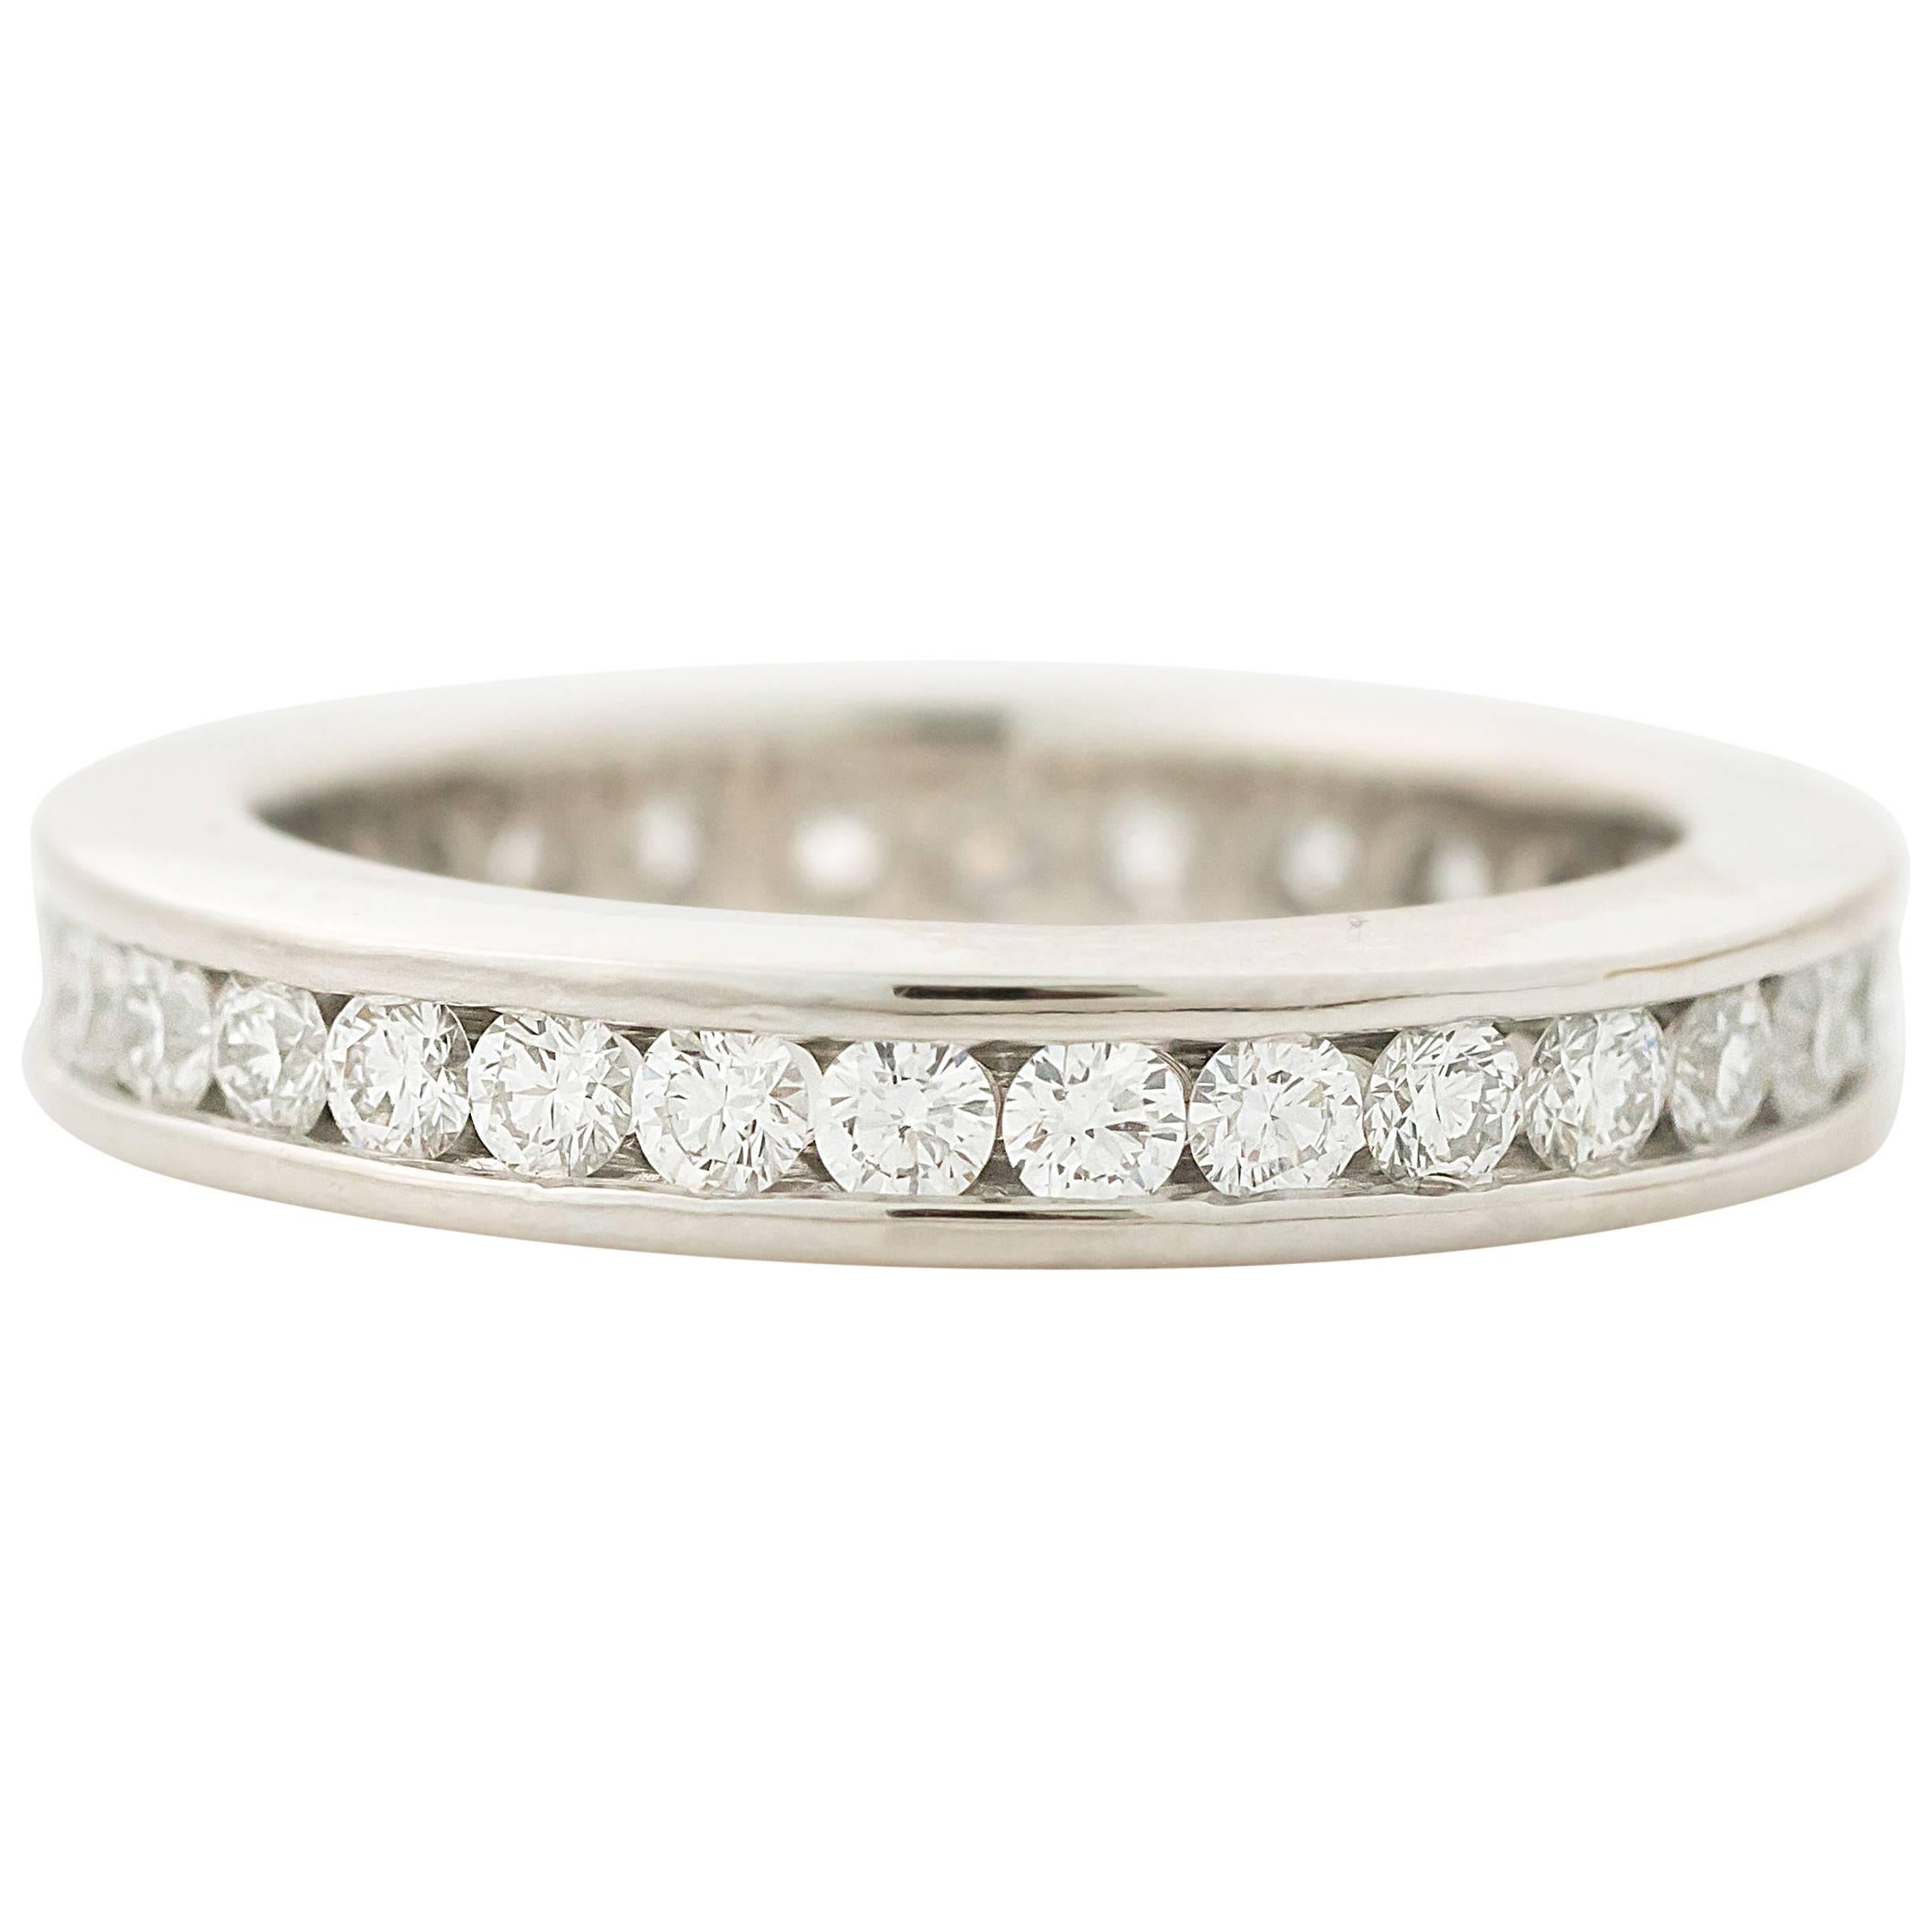 1.20 Carat Diamond and Platinum Eternity Band Ring For Sale